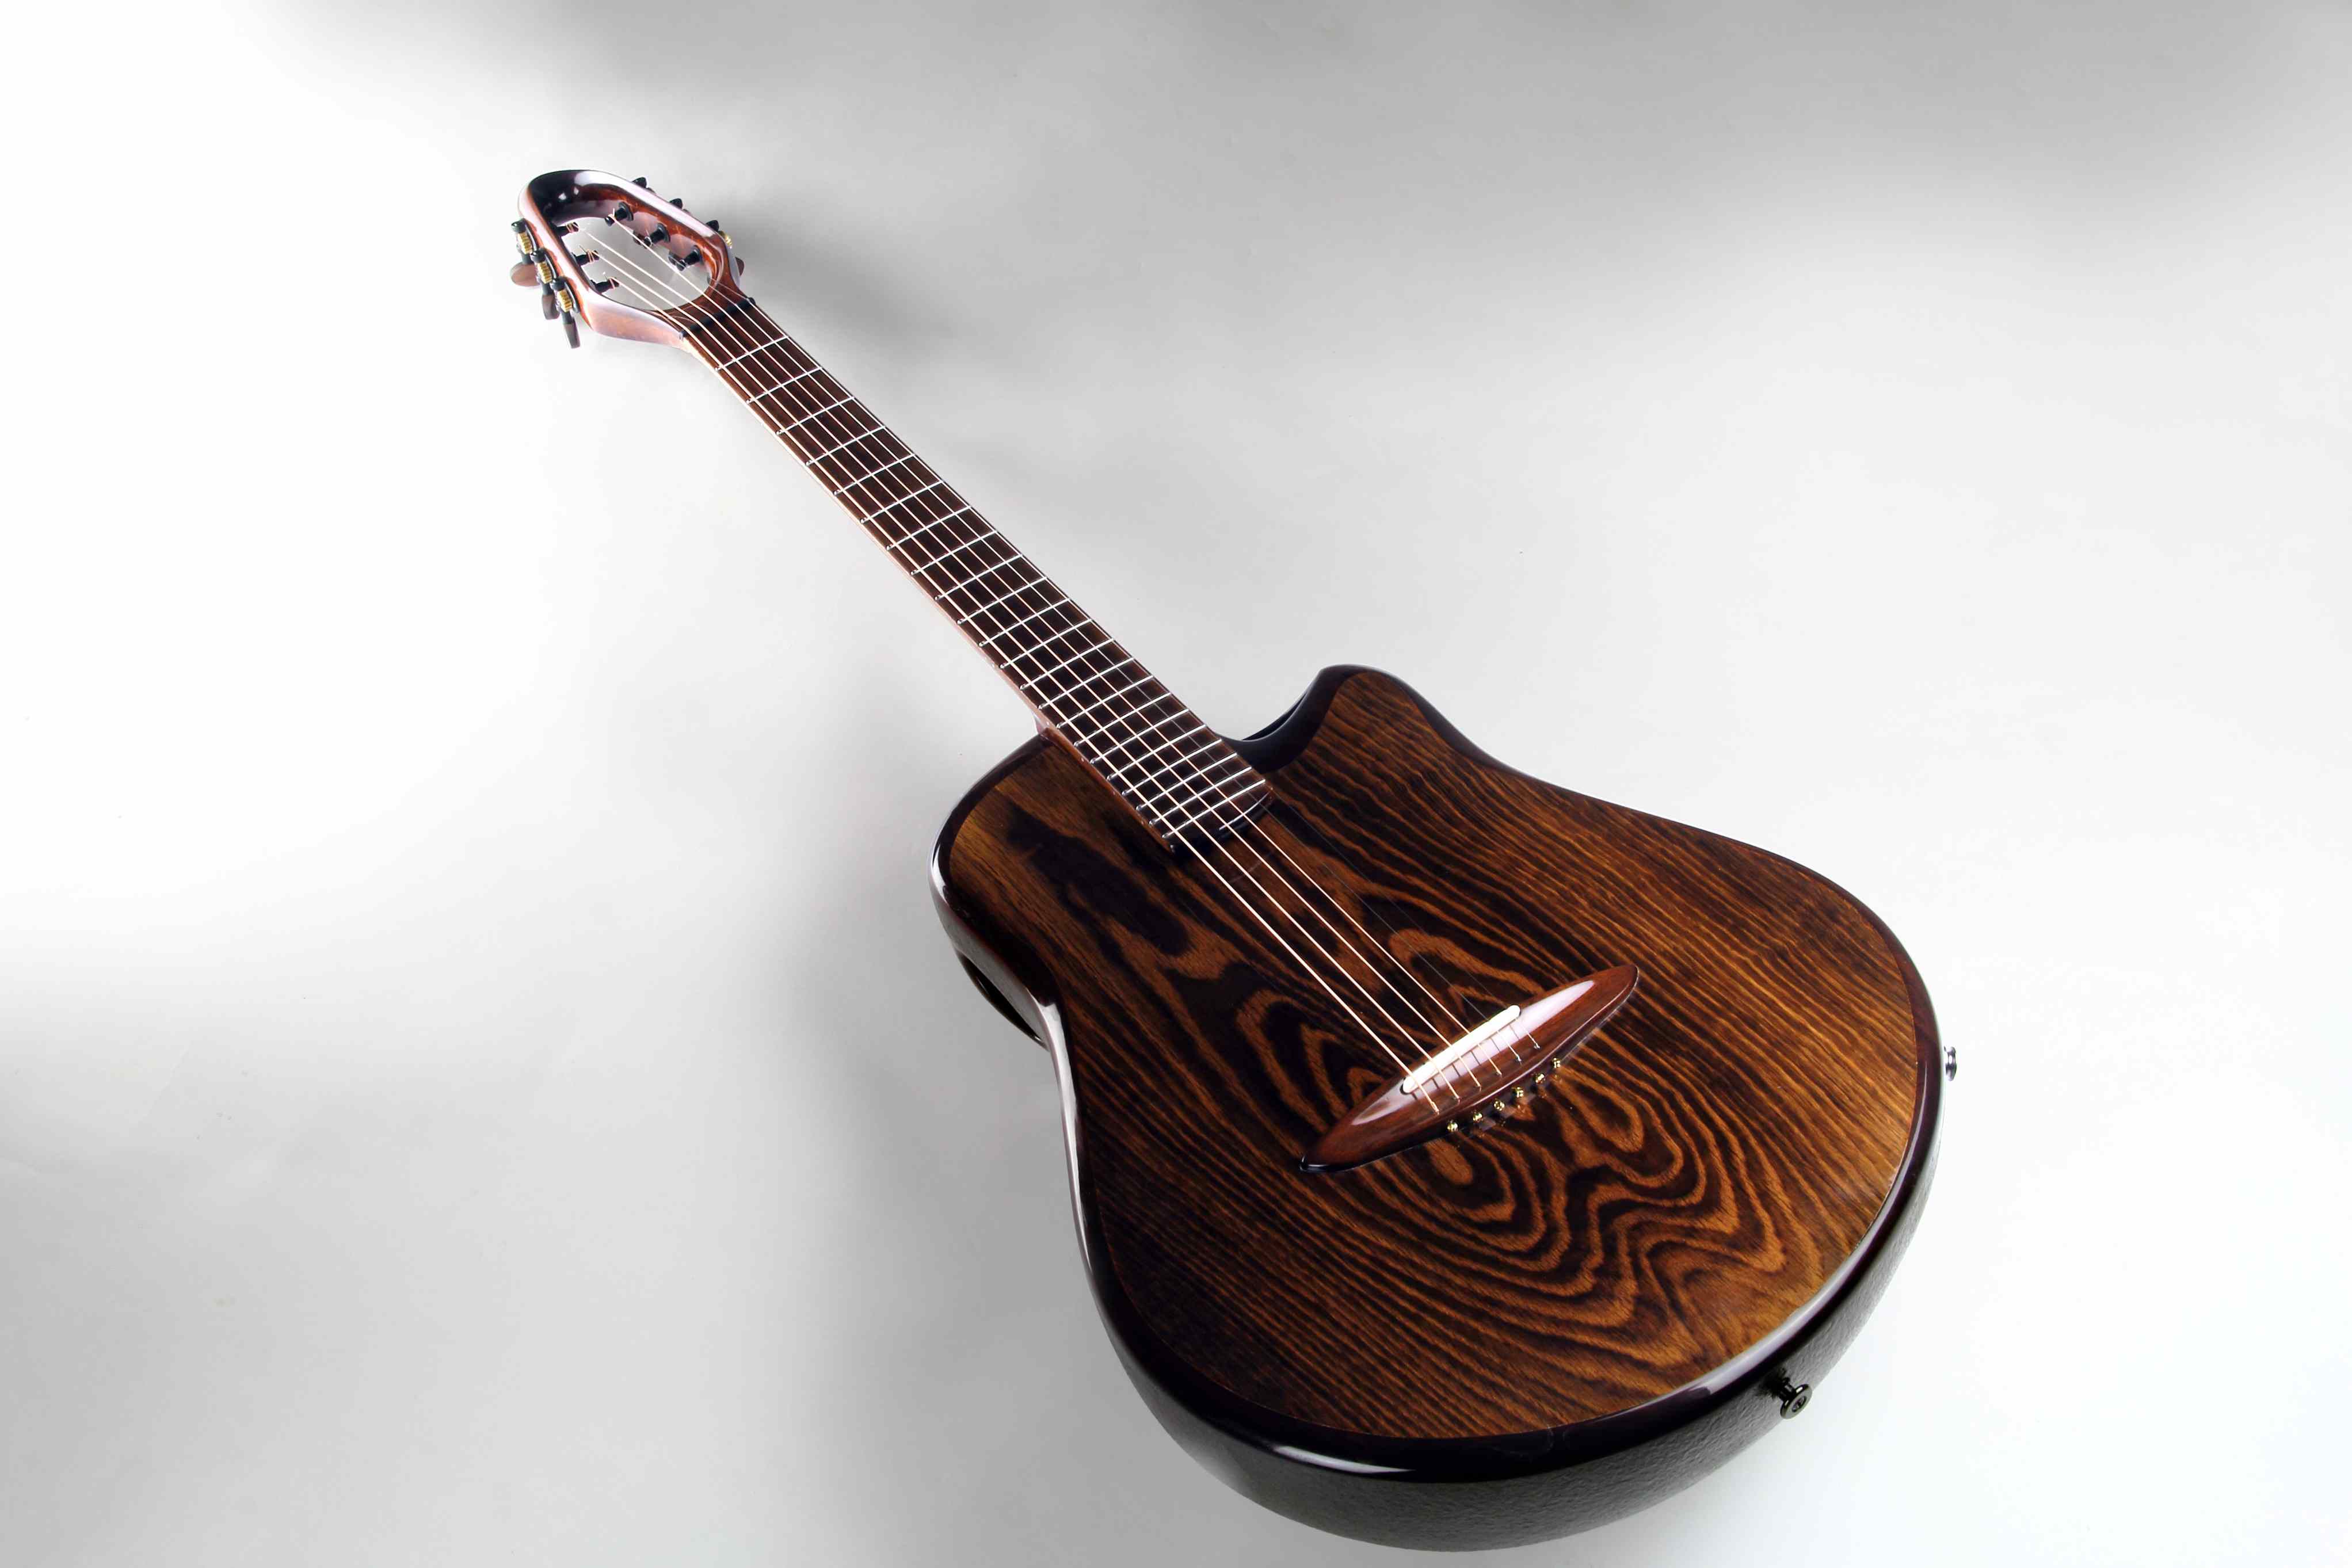 CannaGuitar with top from Sonoveneer oak, fretboard and bridge from Sonowood walnut